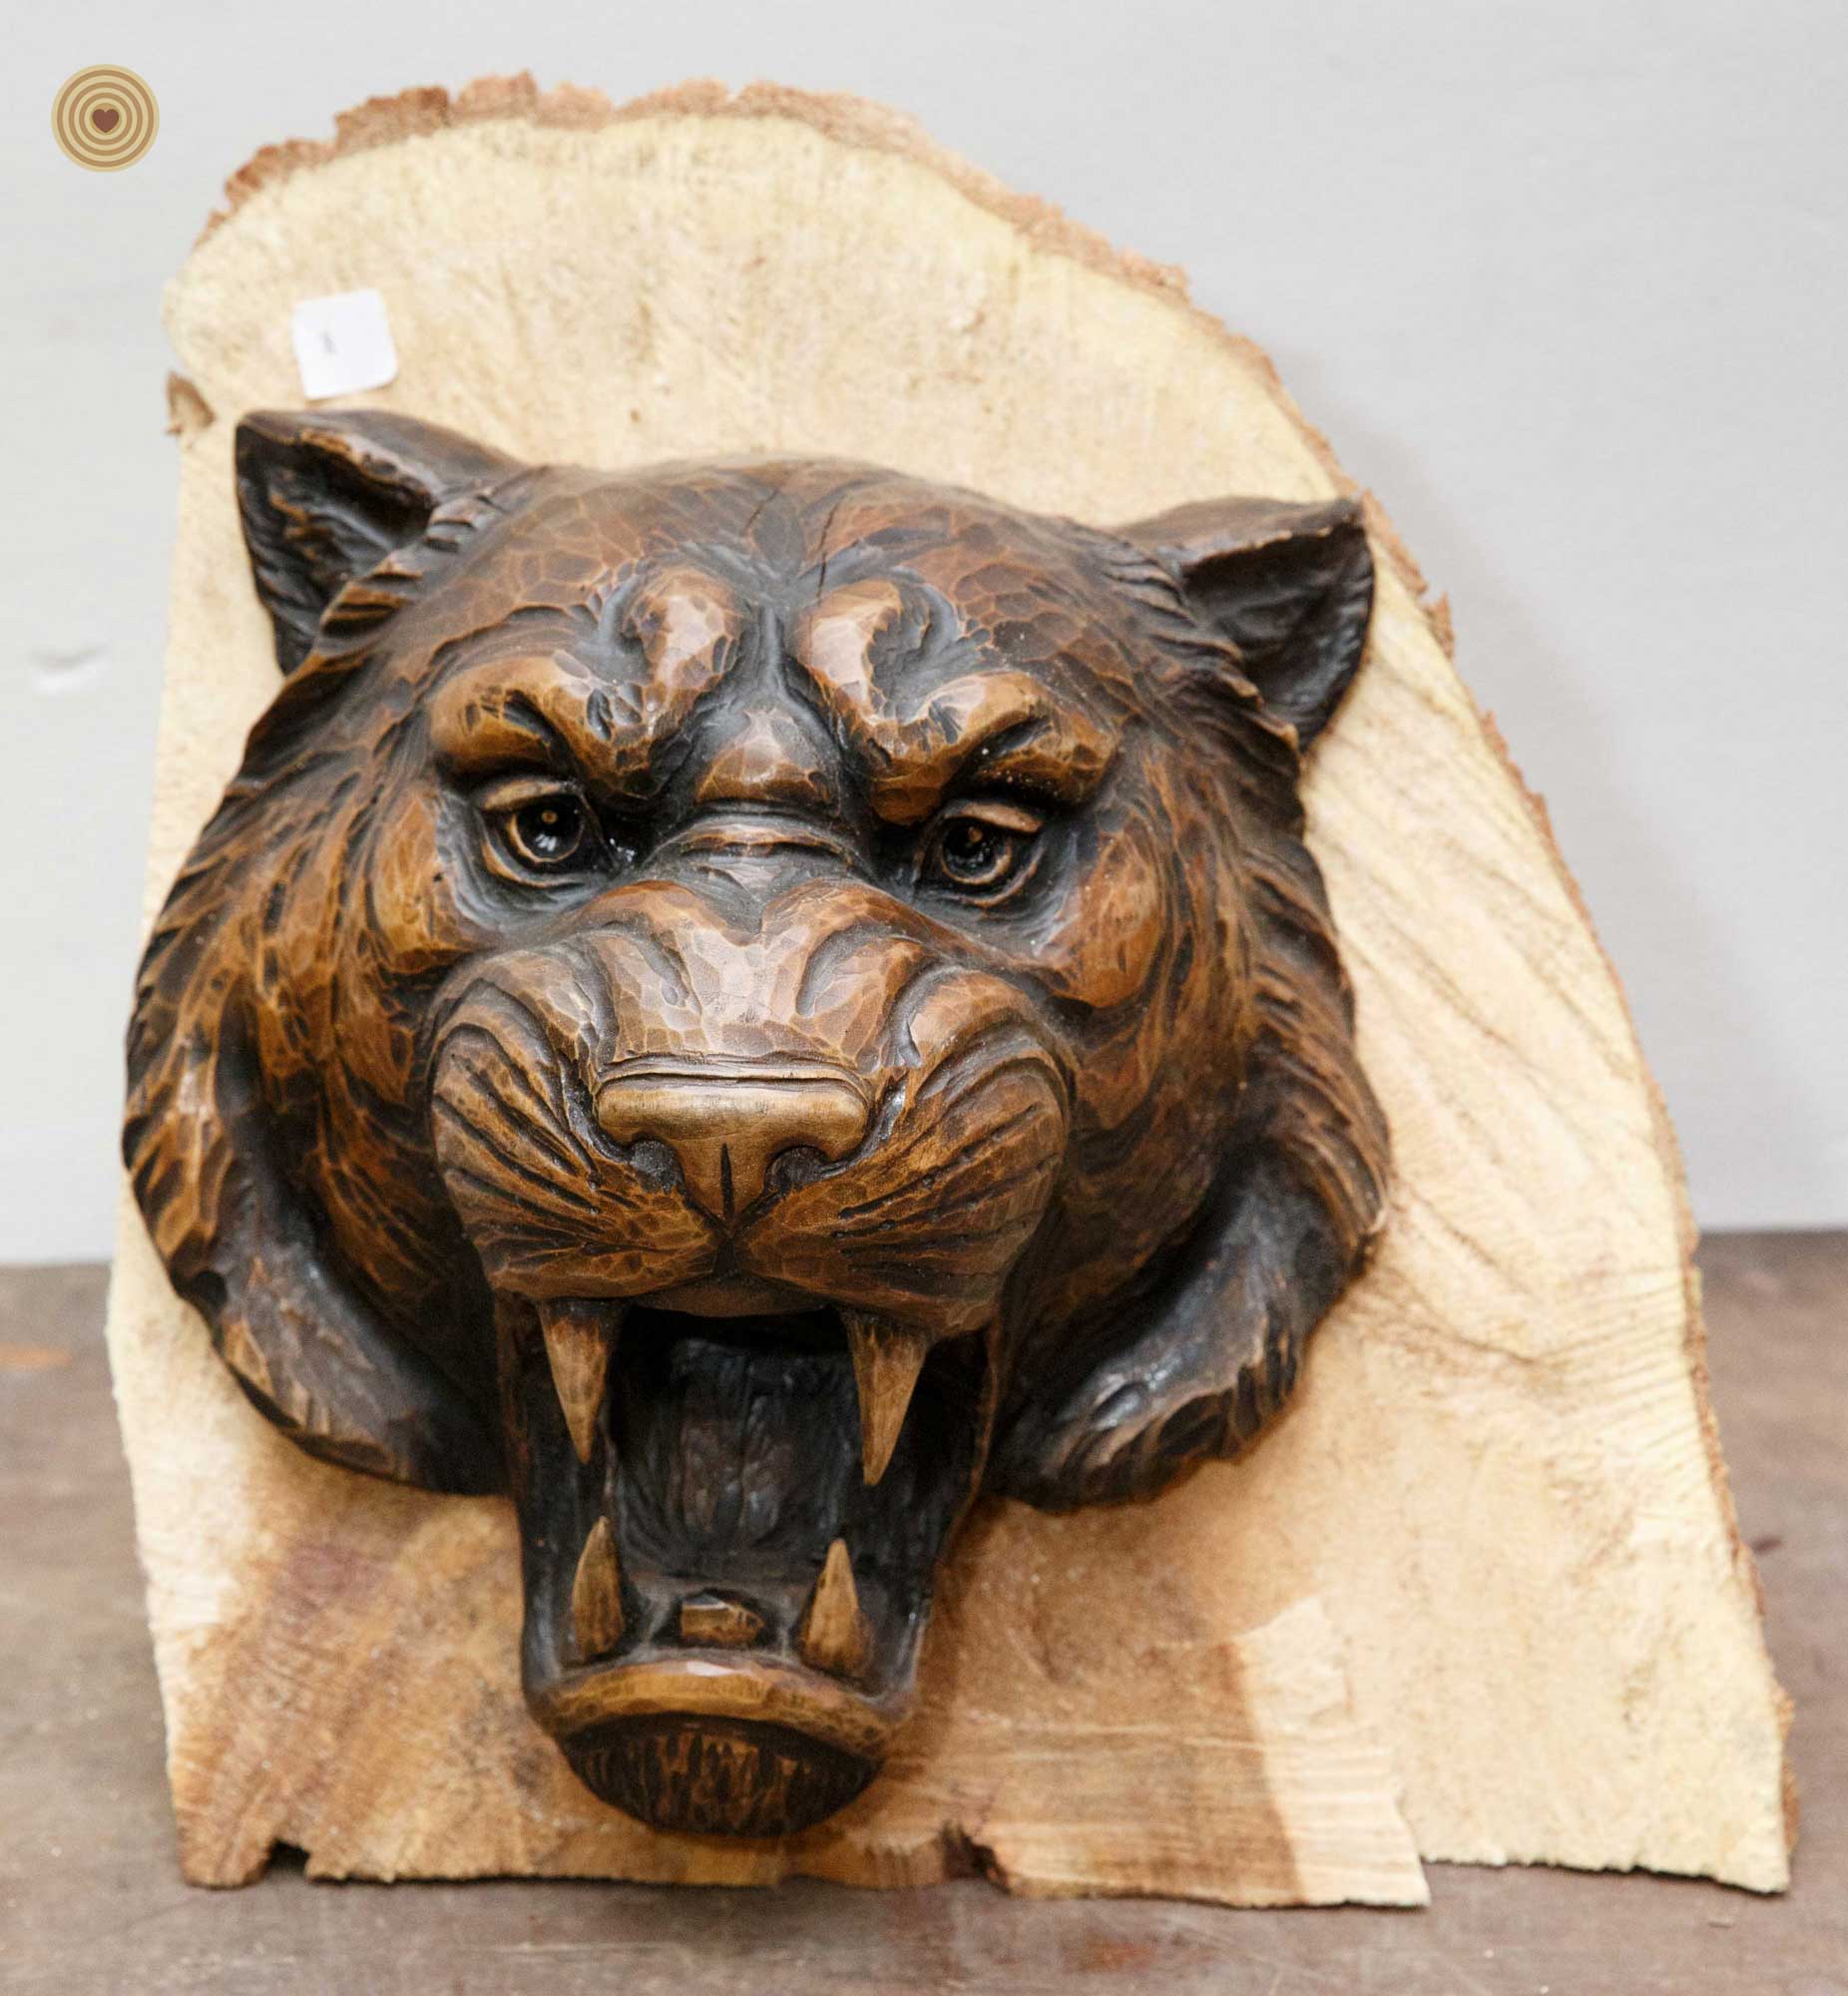 2016 WWD, woodcarving show, works